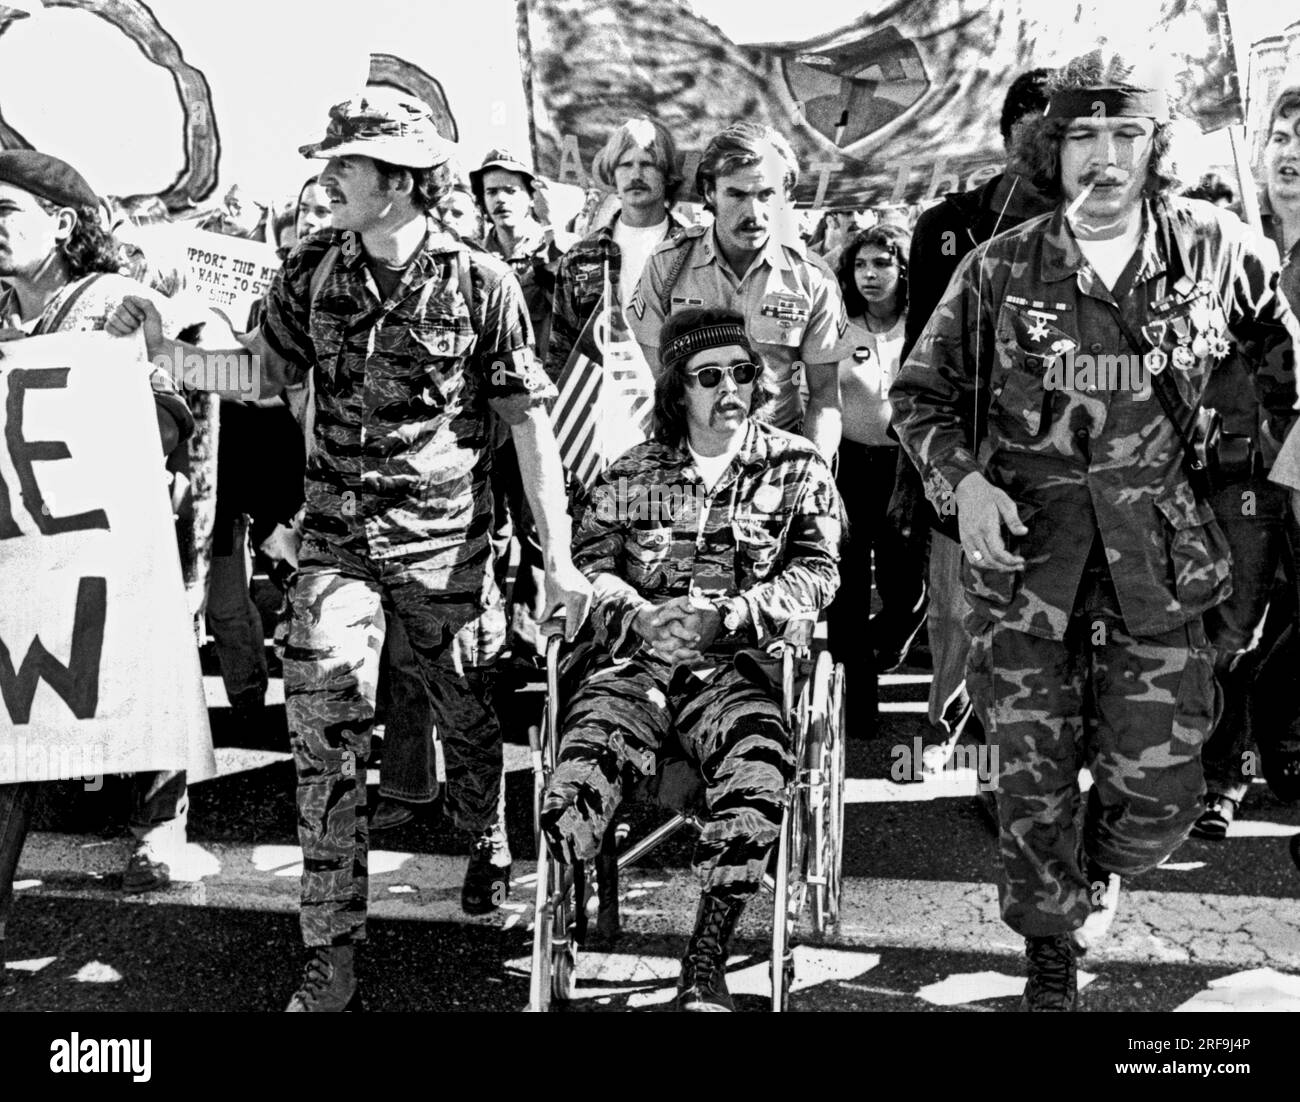 San Francisco, California: 1970 An anti Vietnam War peace march with Vietnam vets, one an amputee in a wheelchair, leading the way. Stock Photo